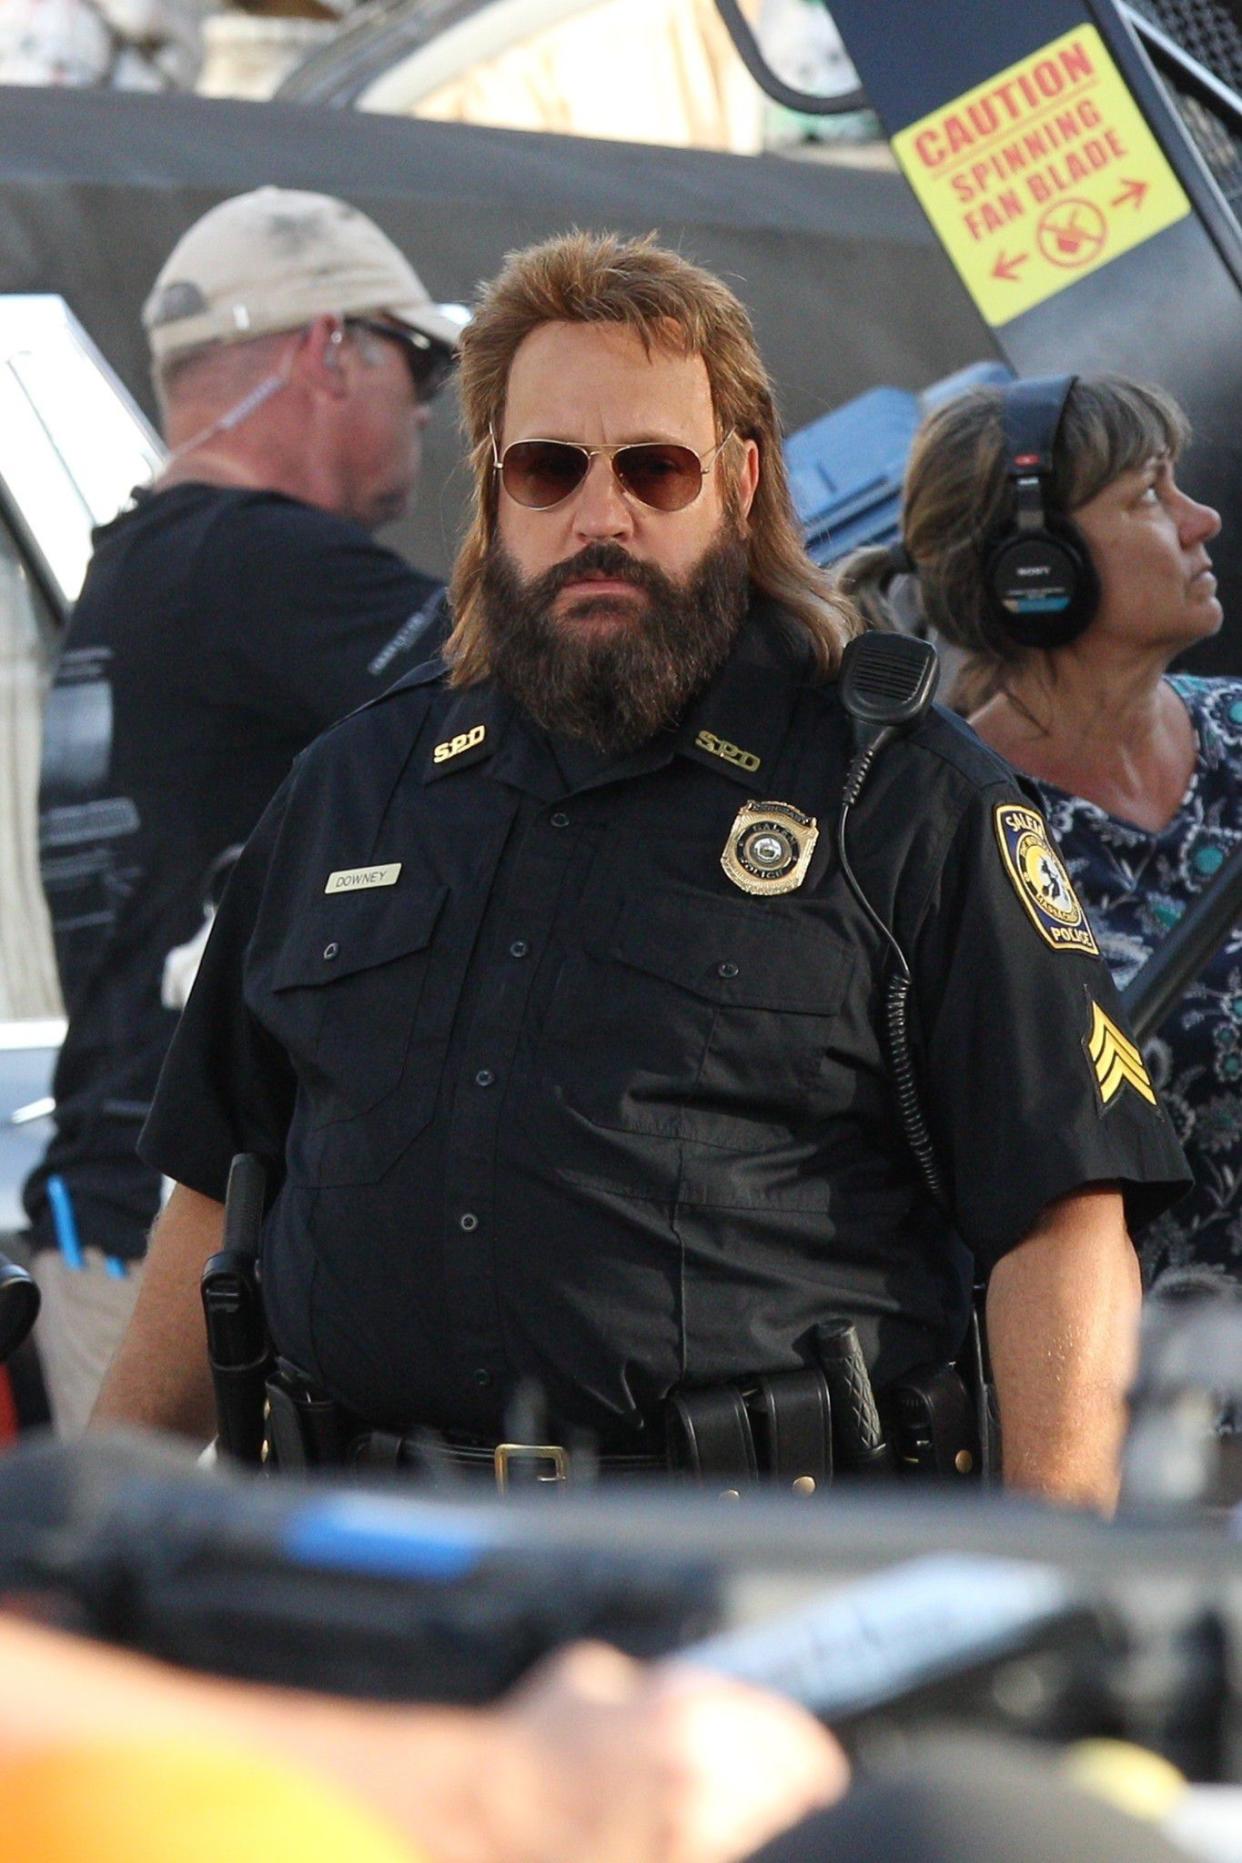 Actor Kevin James looks almost unrecognizable while wearing a serious mullet and police uniform on the set of Netflix and Adam Sandler's latest movie "Hubie Halloween," in Marblehead, MA on July 15, 2019.